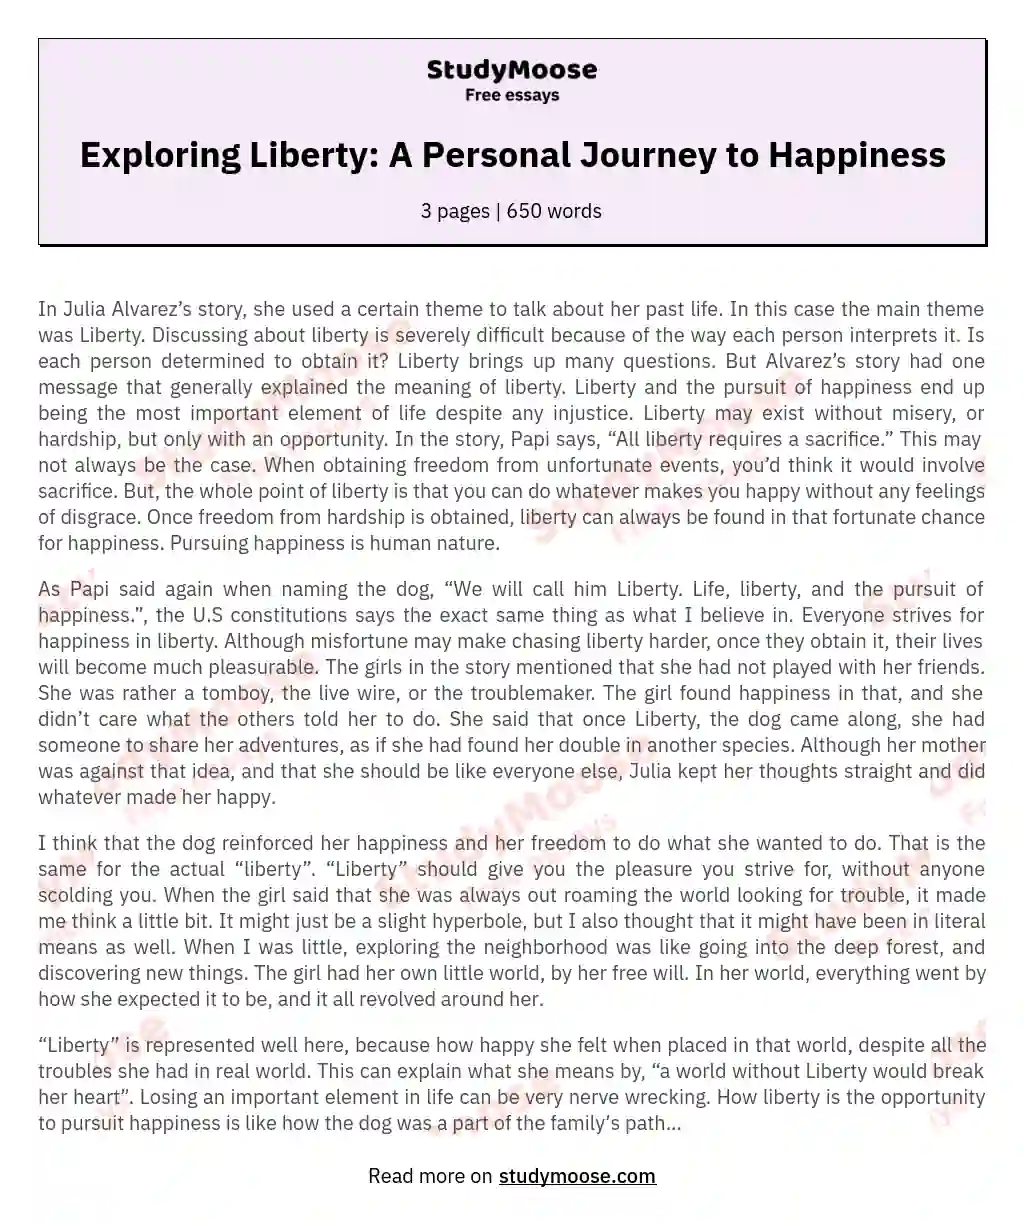 Exploring Liberty: A Personal Journey to Happiness essay